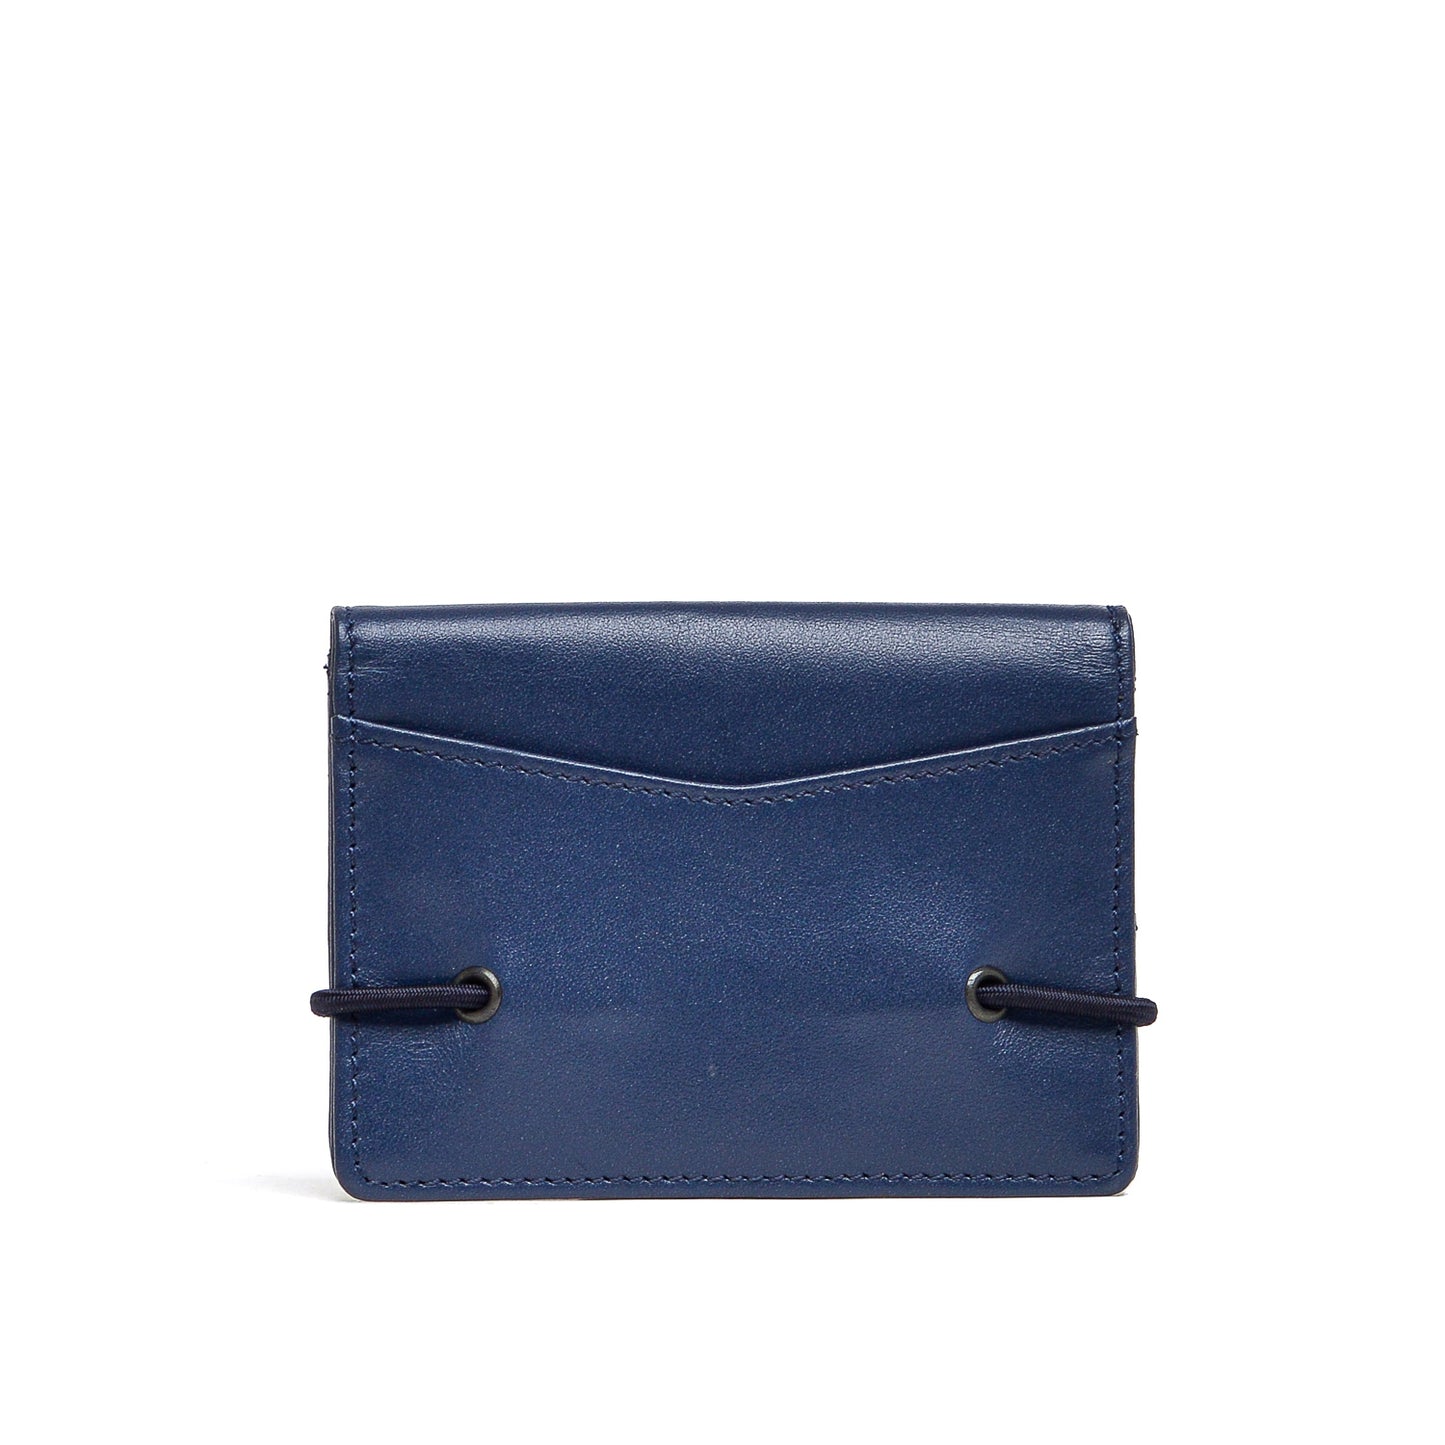 Classic Blue Leather Folding Wallet